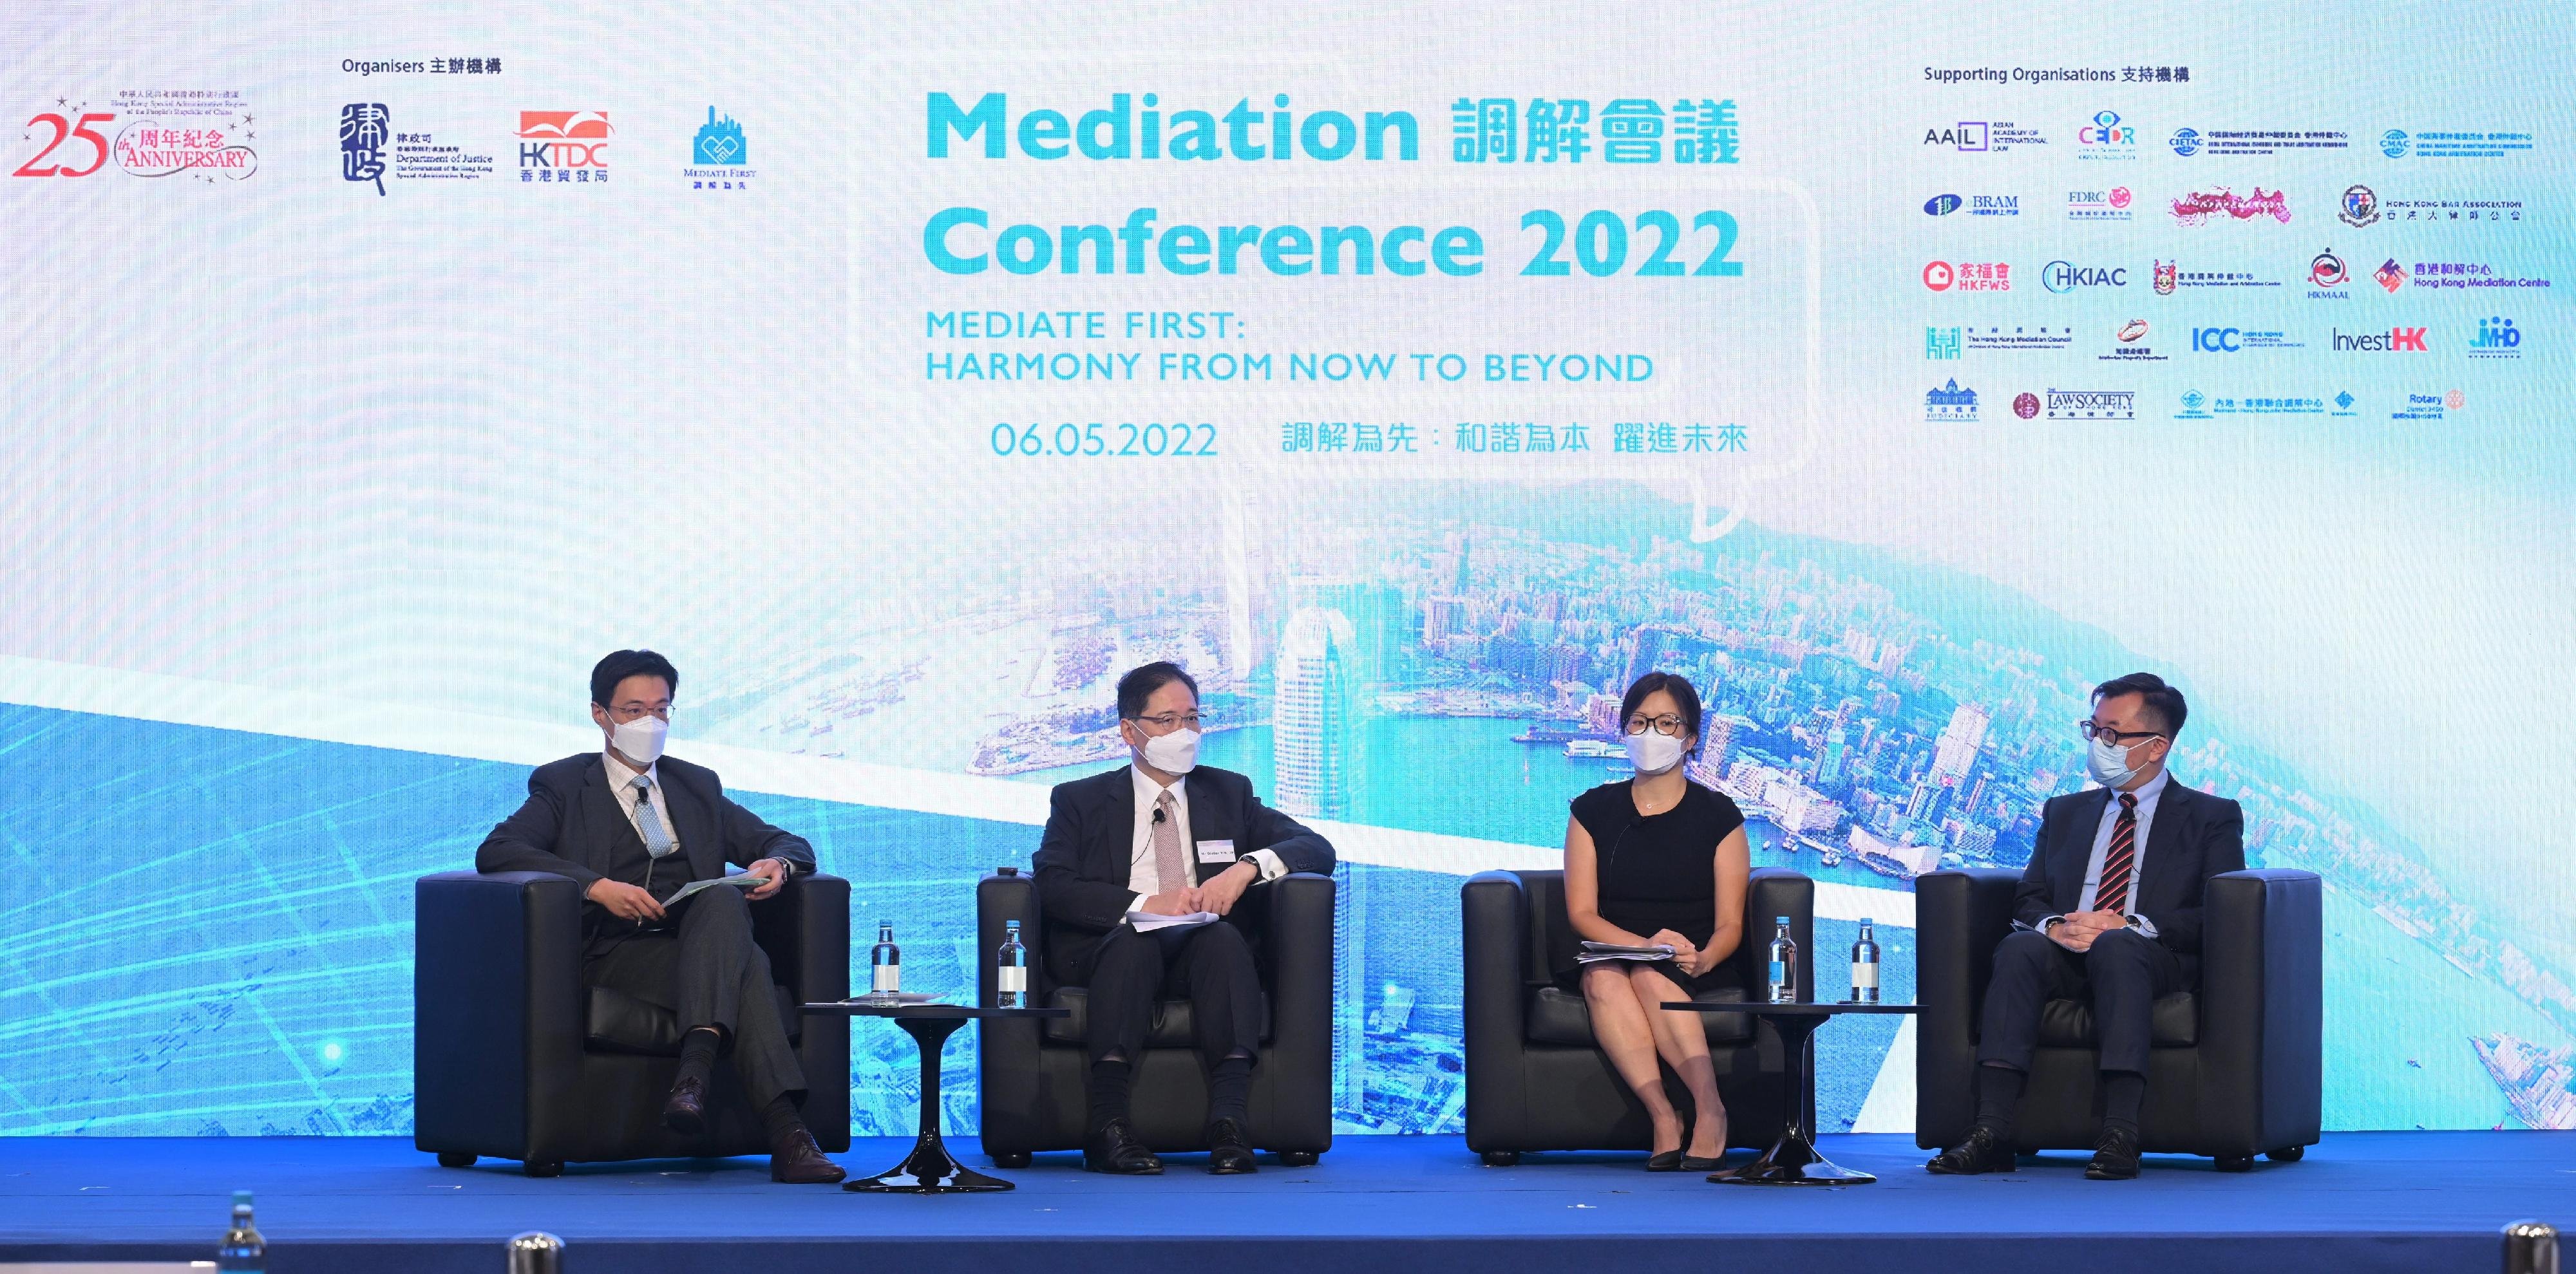 The Mediation Conference 2022 co-organised by the Department of Justice and the Hong Kong Trade Development Council was successfully held today (May 6). Photo shows Panel 2 speakers sharing their experience in how mediation has been well suited for tackling various kinds of disputes during the epidemic.